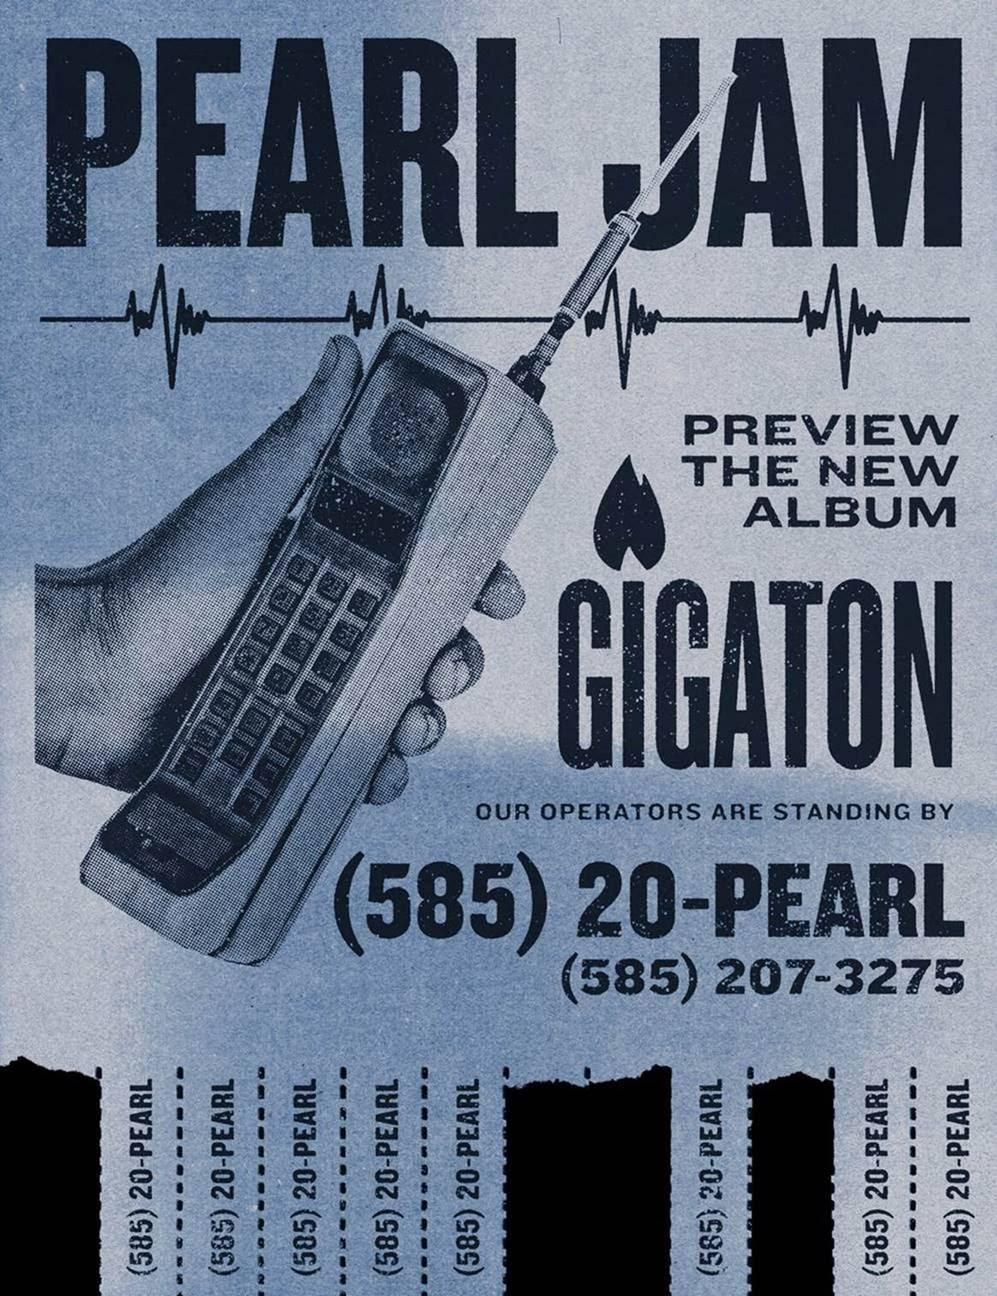 Pearl Jam Shares Hotline to Get Early Listen at <i> Gigaton</i>” title=”unnamed-1584990415″ data-original-id=”352125″ data-adjusted-id=”352125″ class=”sm_size_full_width sm_alignment_center ” data-image-use=”multiple_use” /><div class=